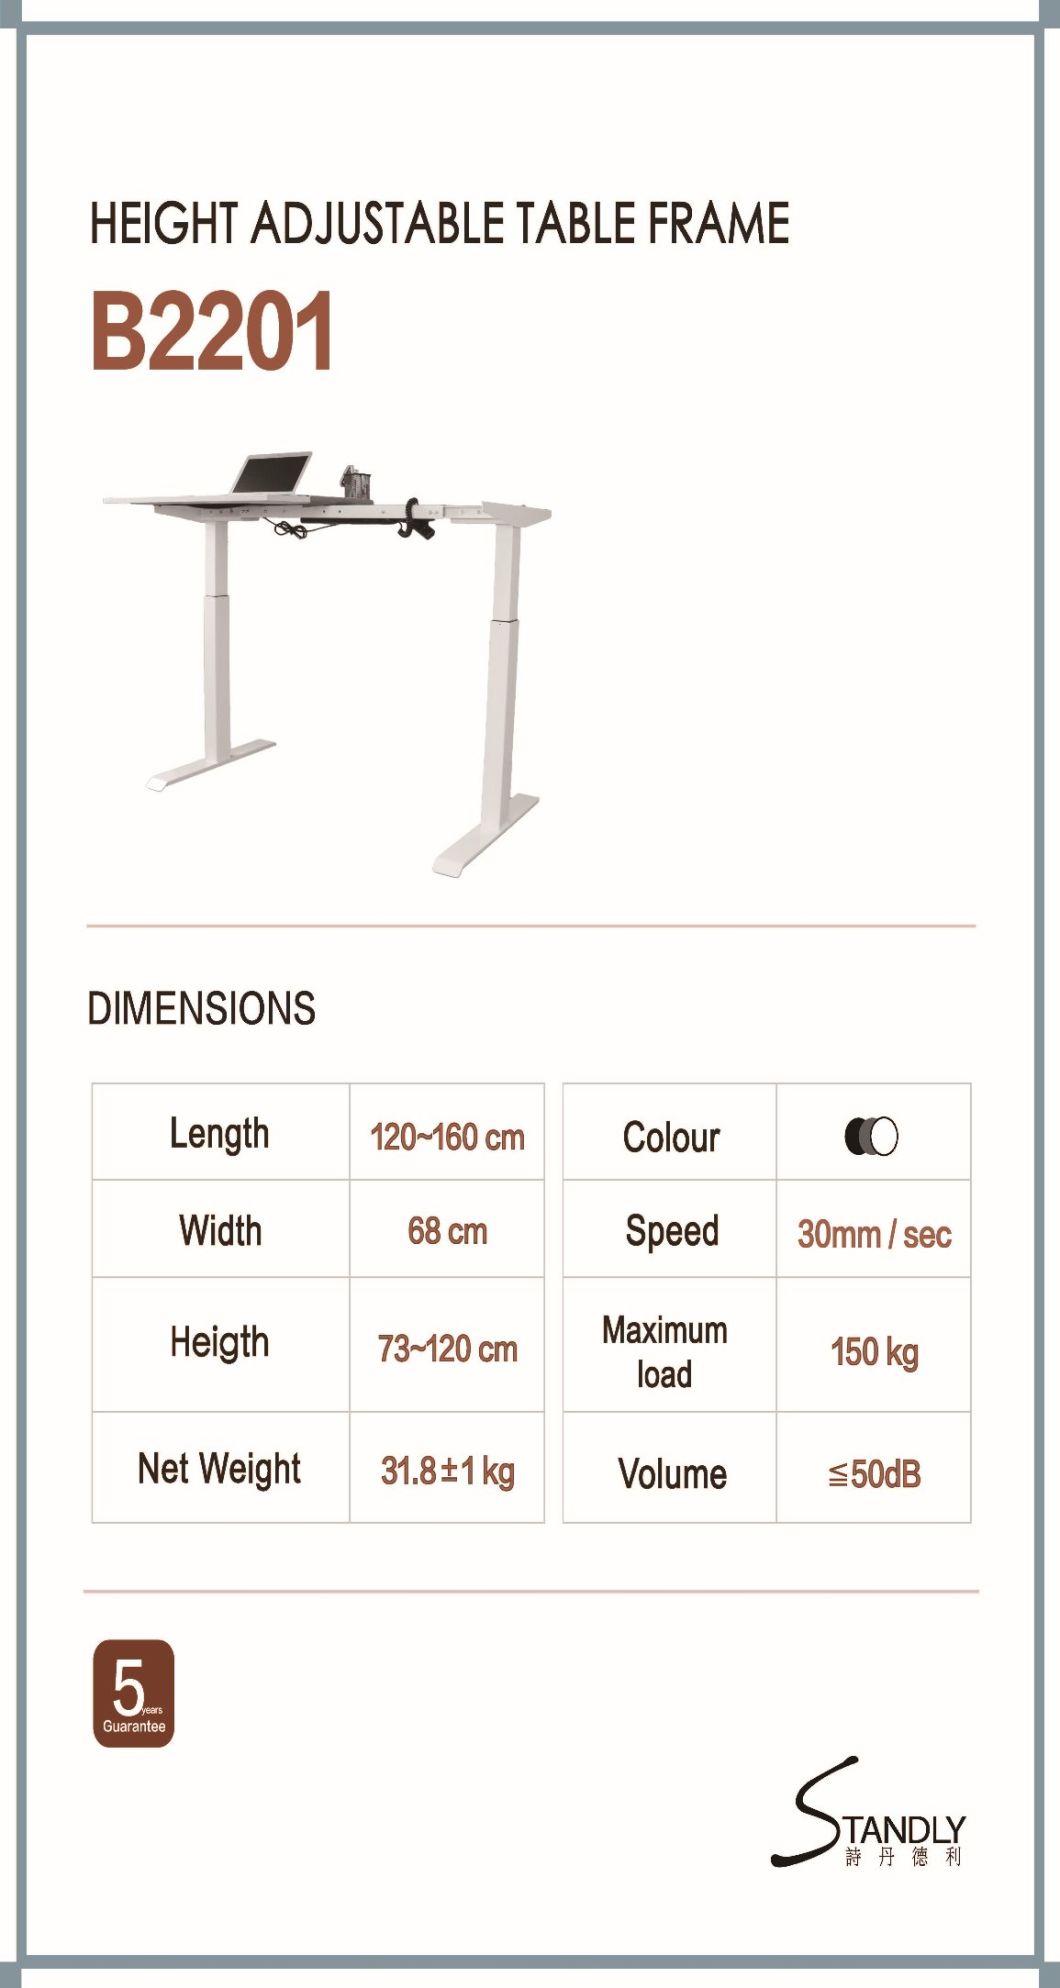 Stand up Computer Desk Office Bracket Intelligent Adjustable Automatic Electric Lifting Table Desktop Table Home